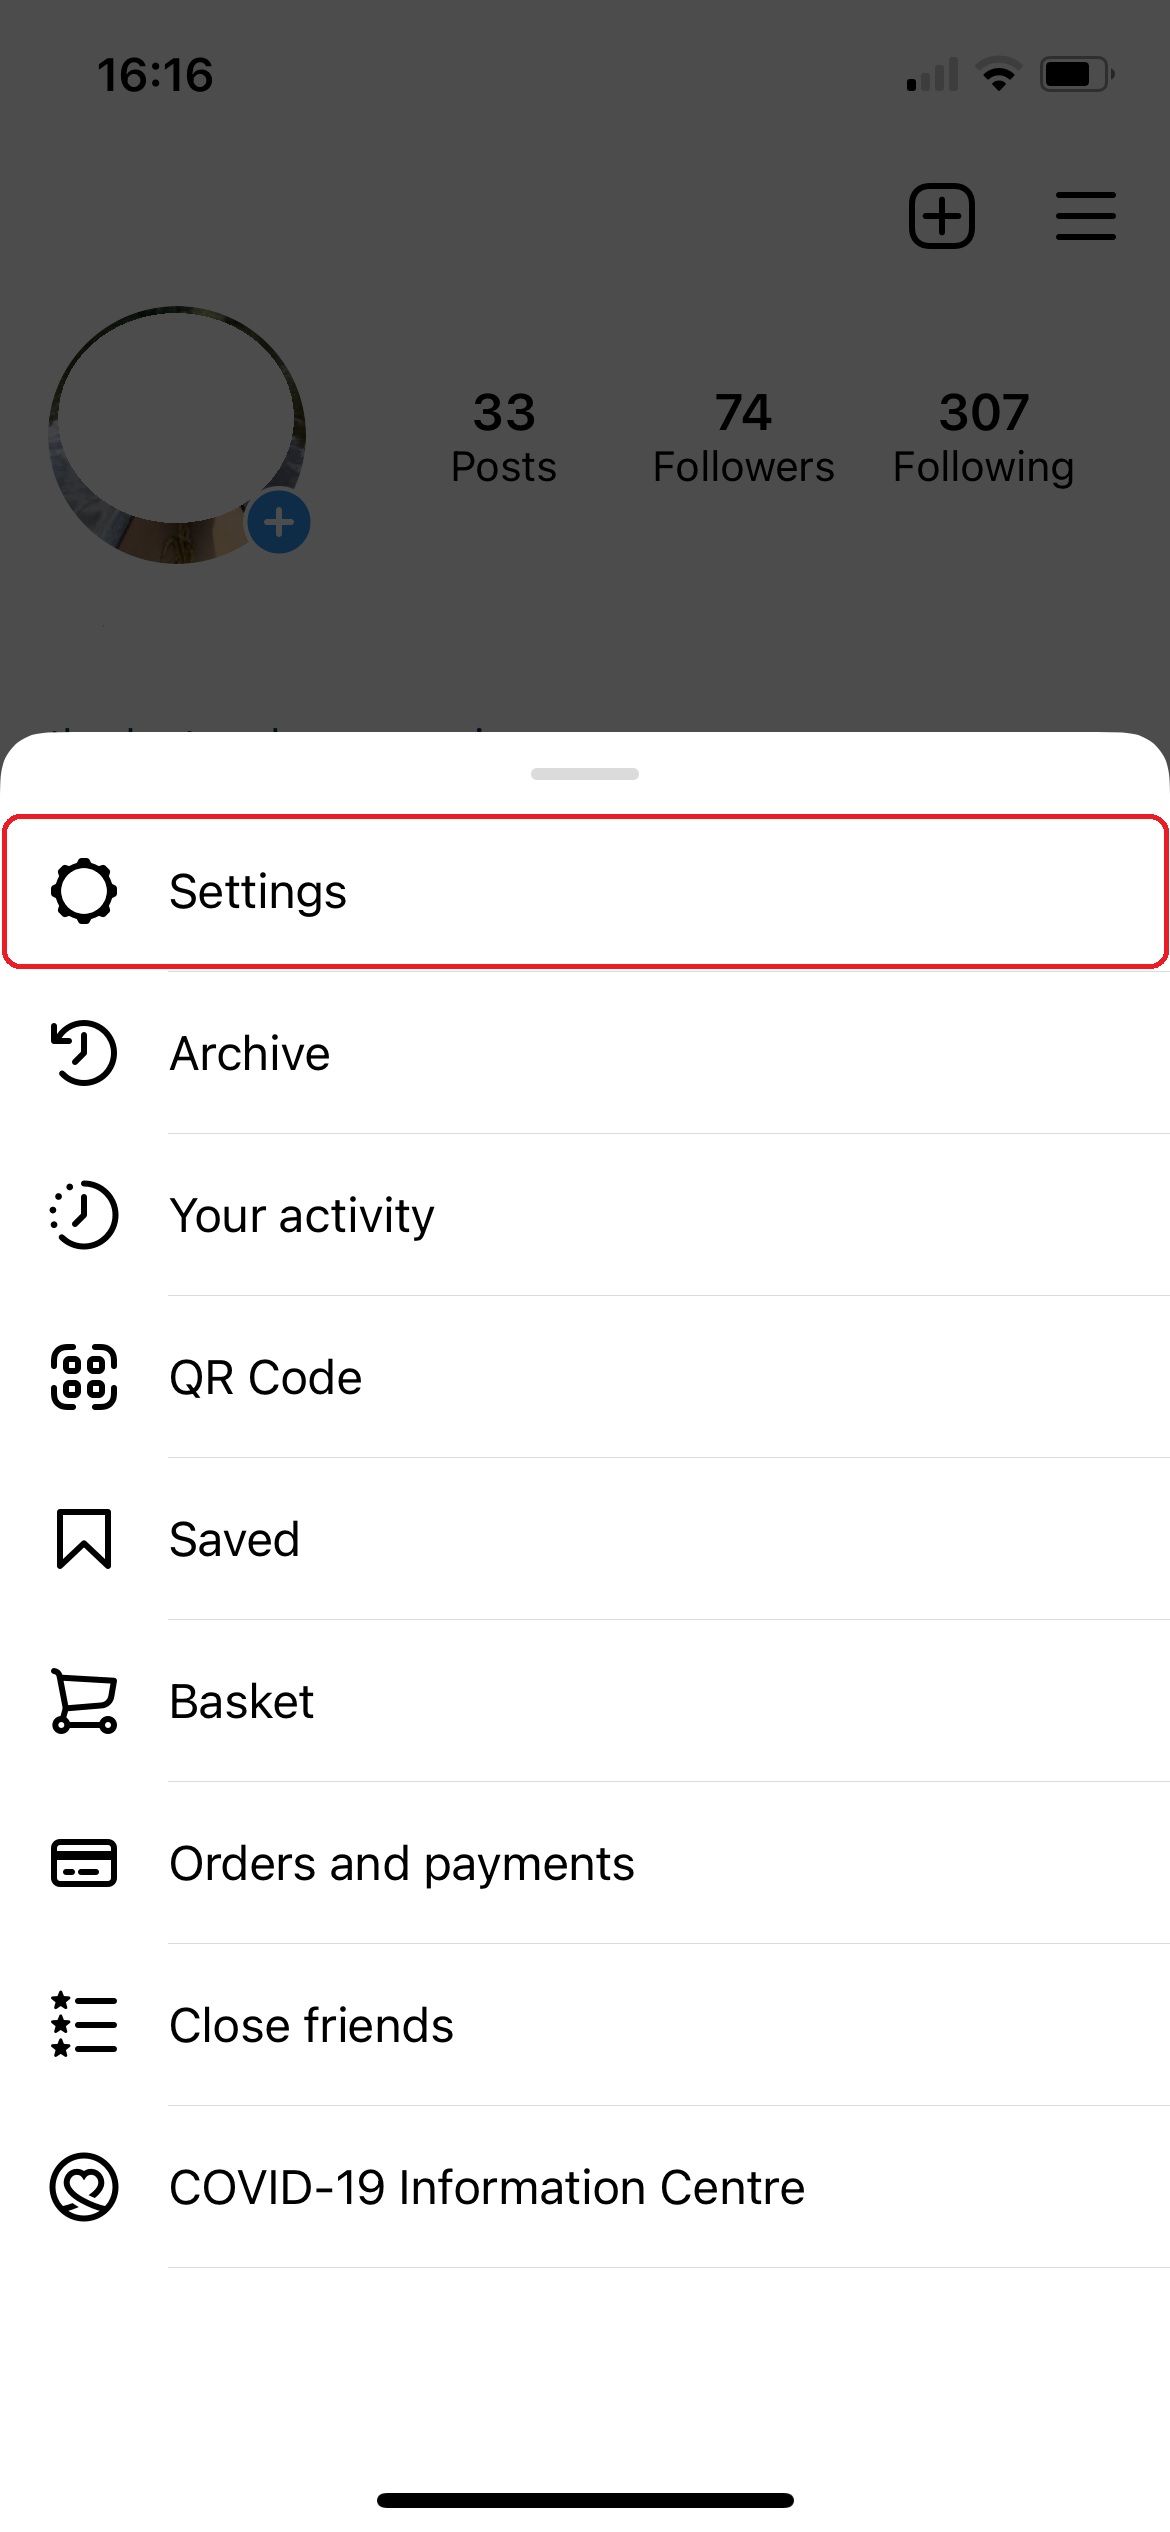 where to find settings on instagram profile